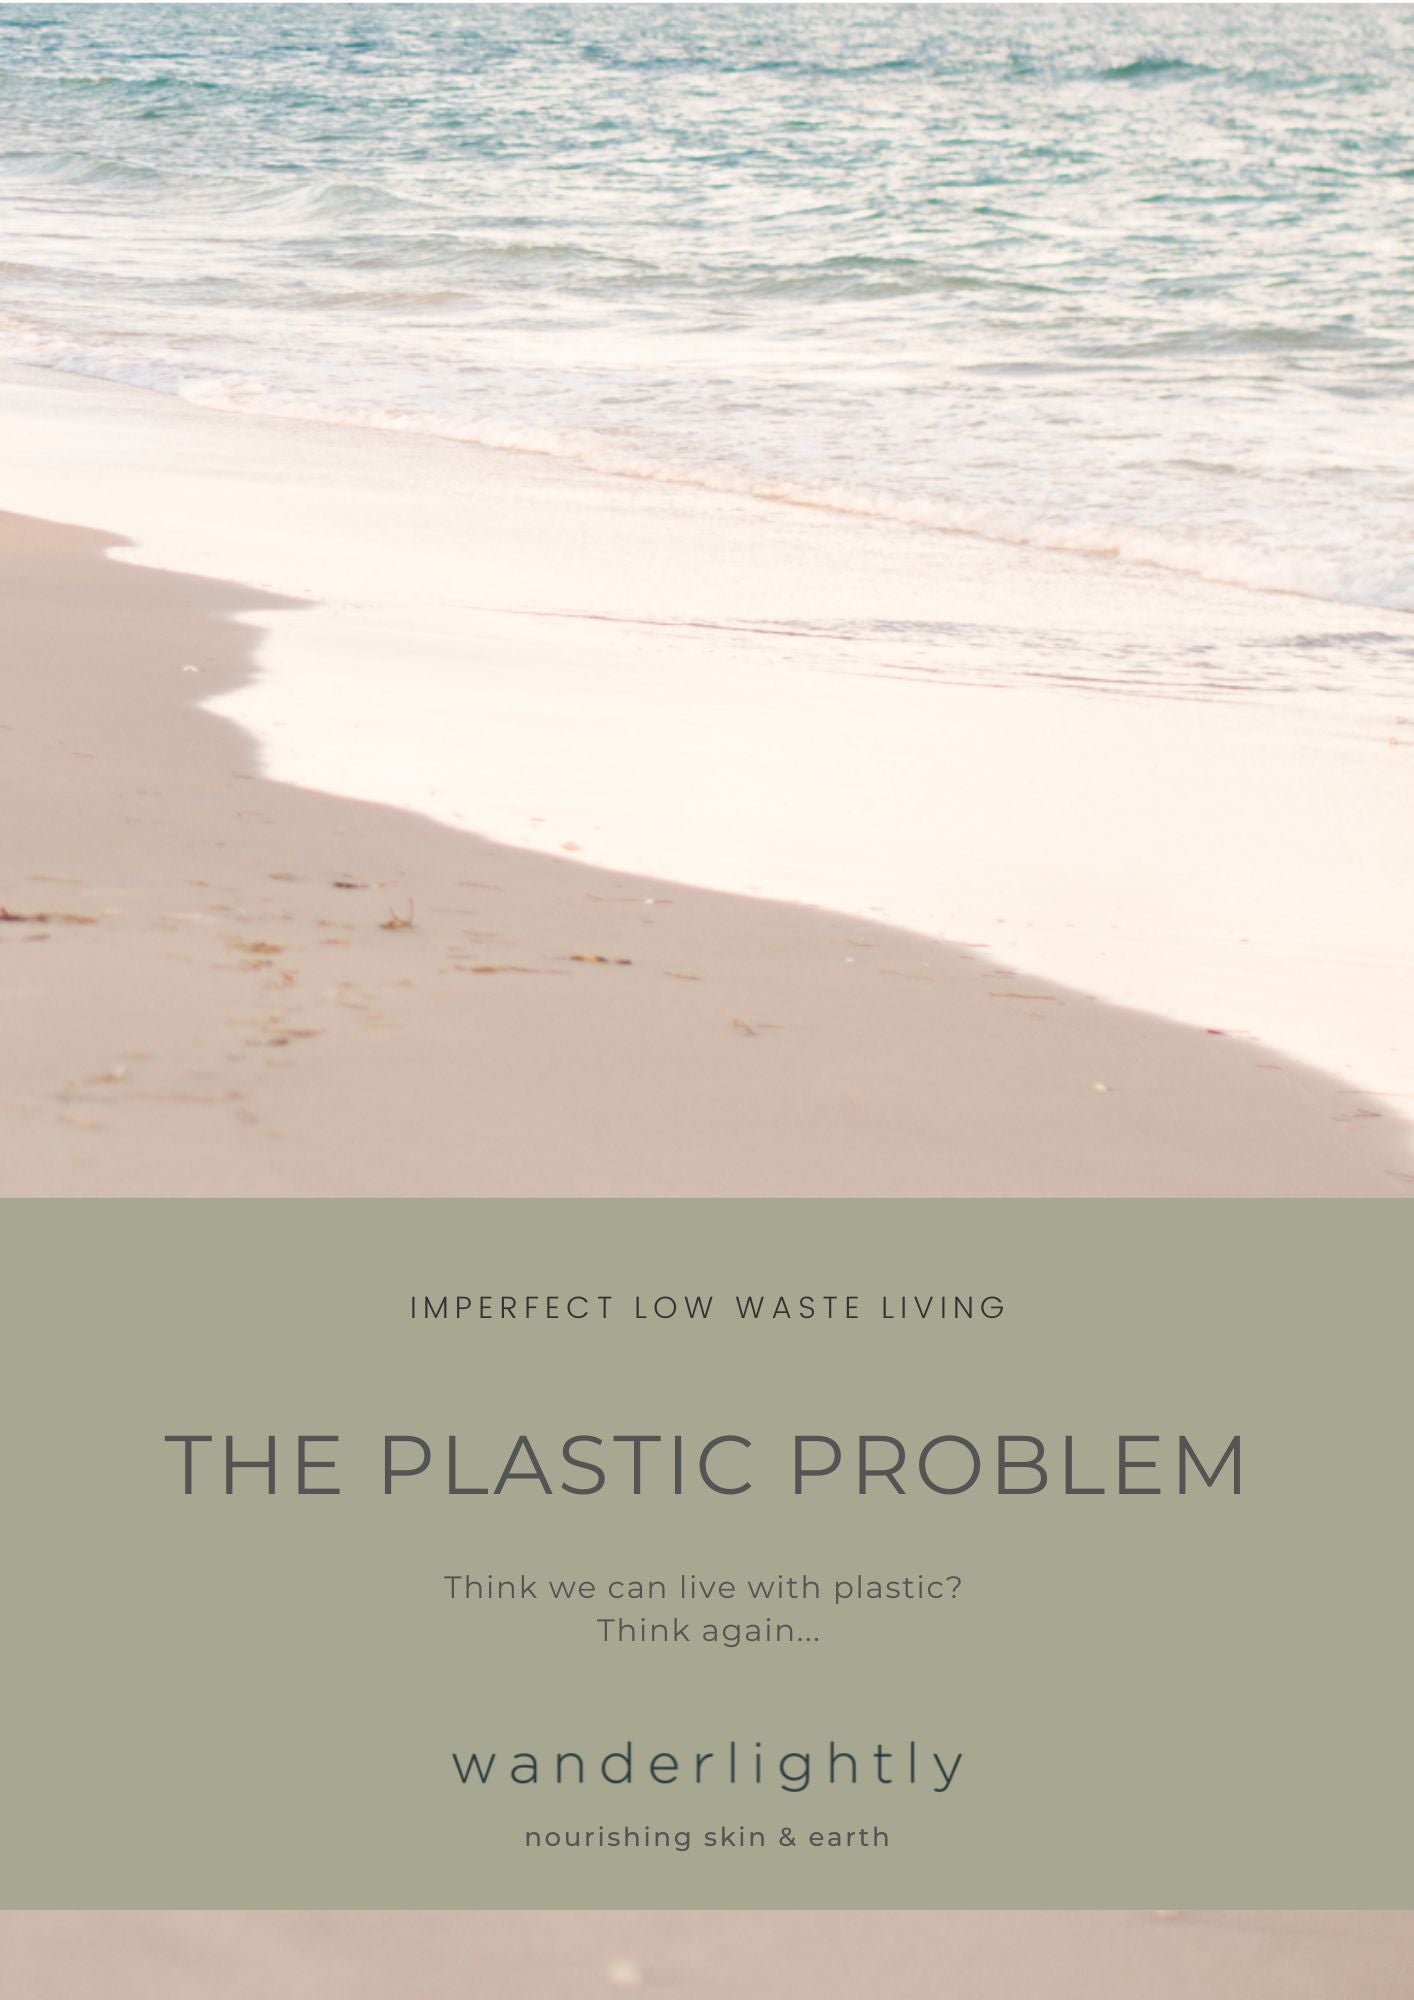 Plastic pollution - an introduction